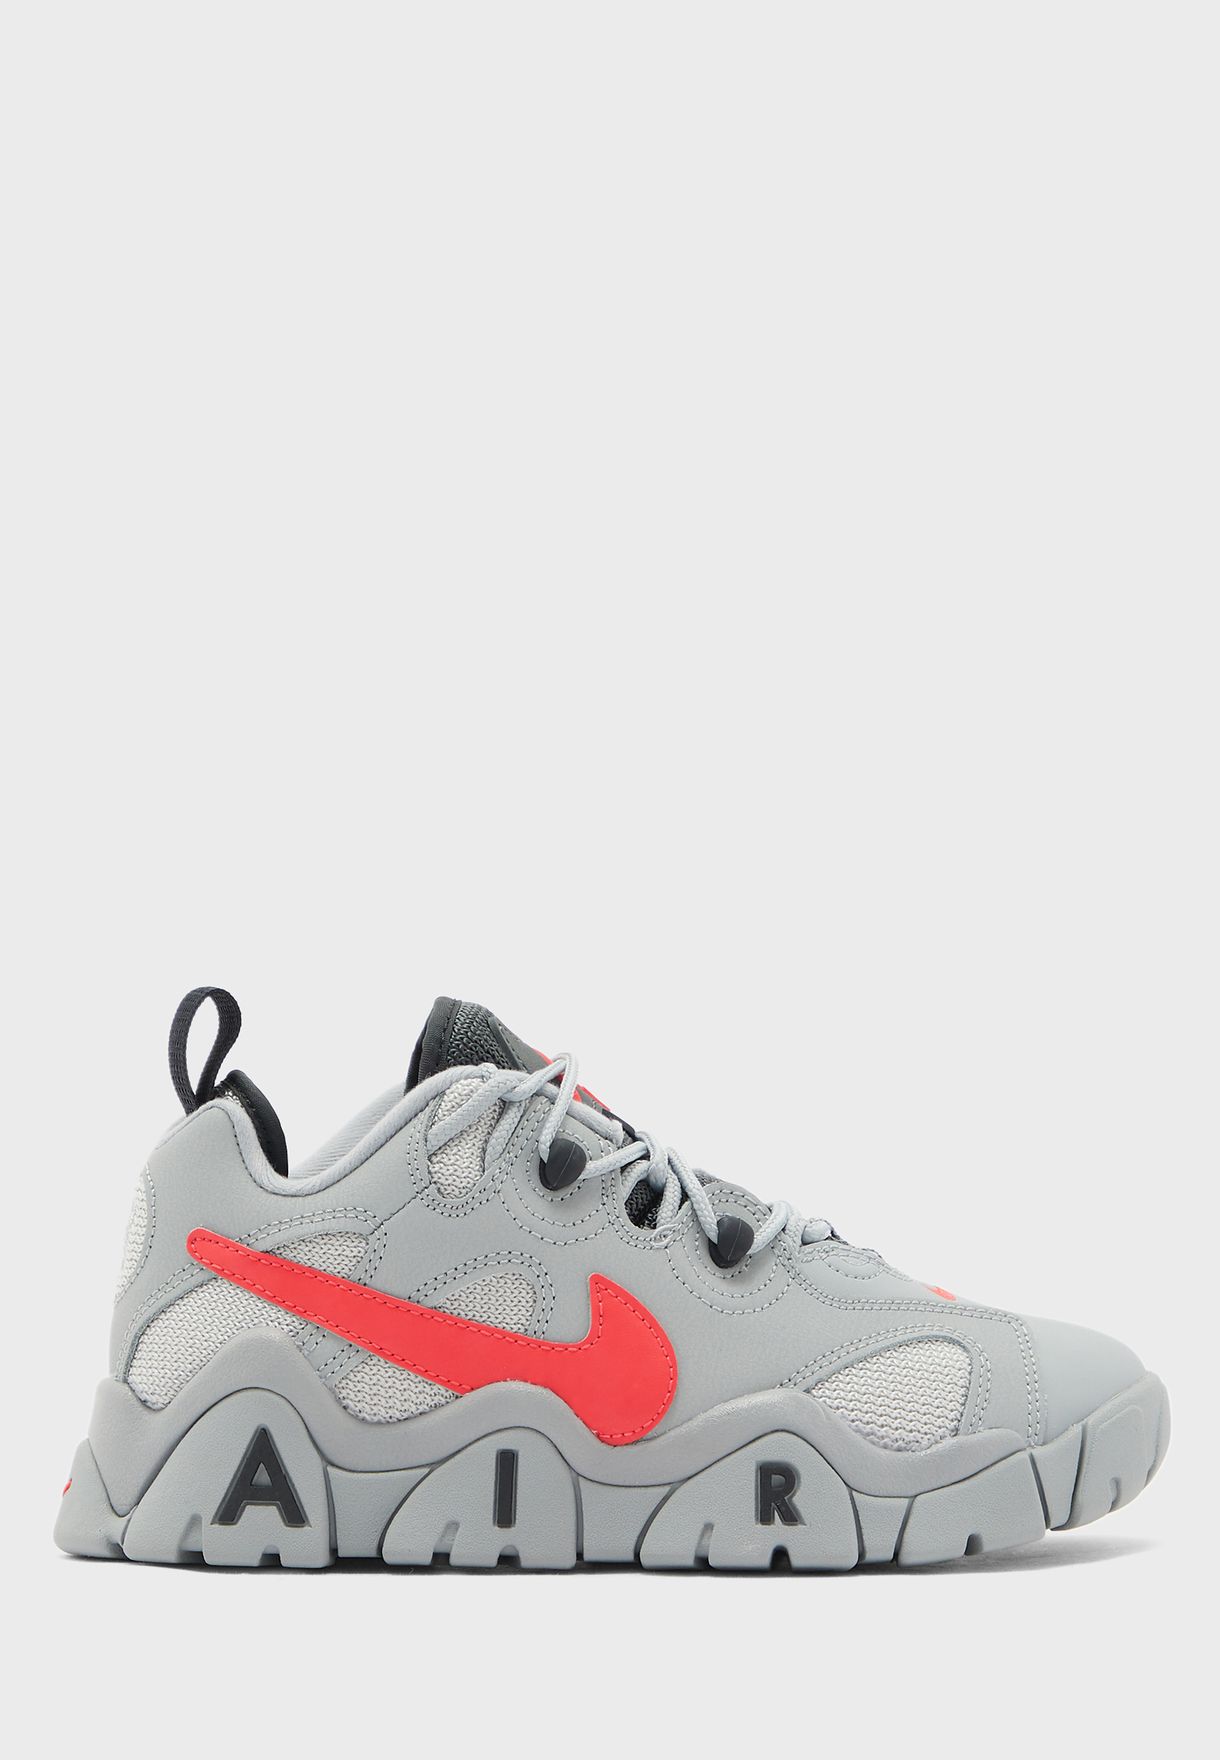 nike air barrage grey and pink